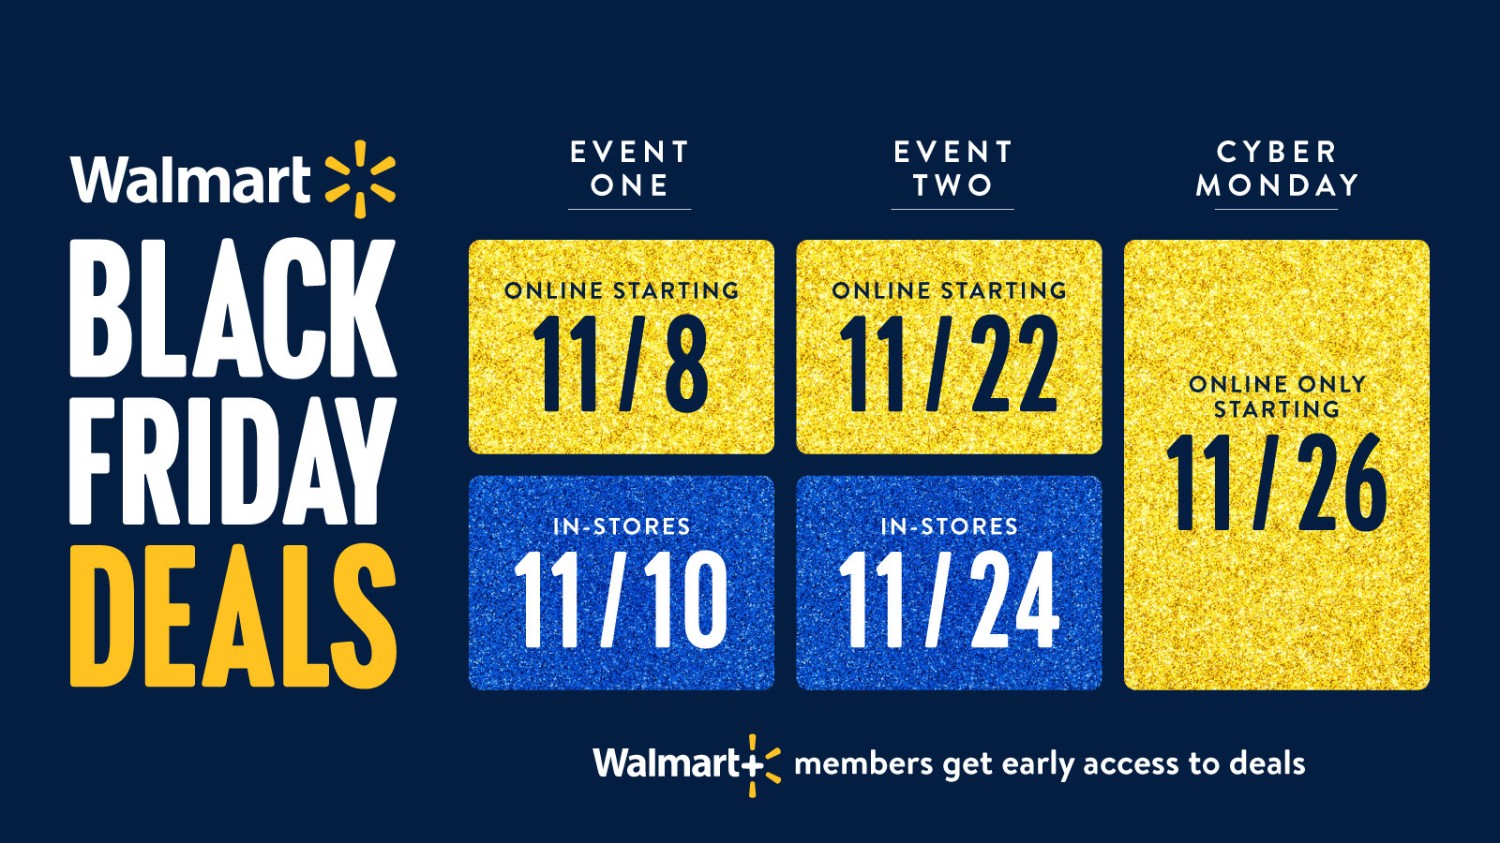 Walmart's “Black Friday Deals” Are Back With Major Savings and Early Access  Shopping for Walmart+ Members